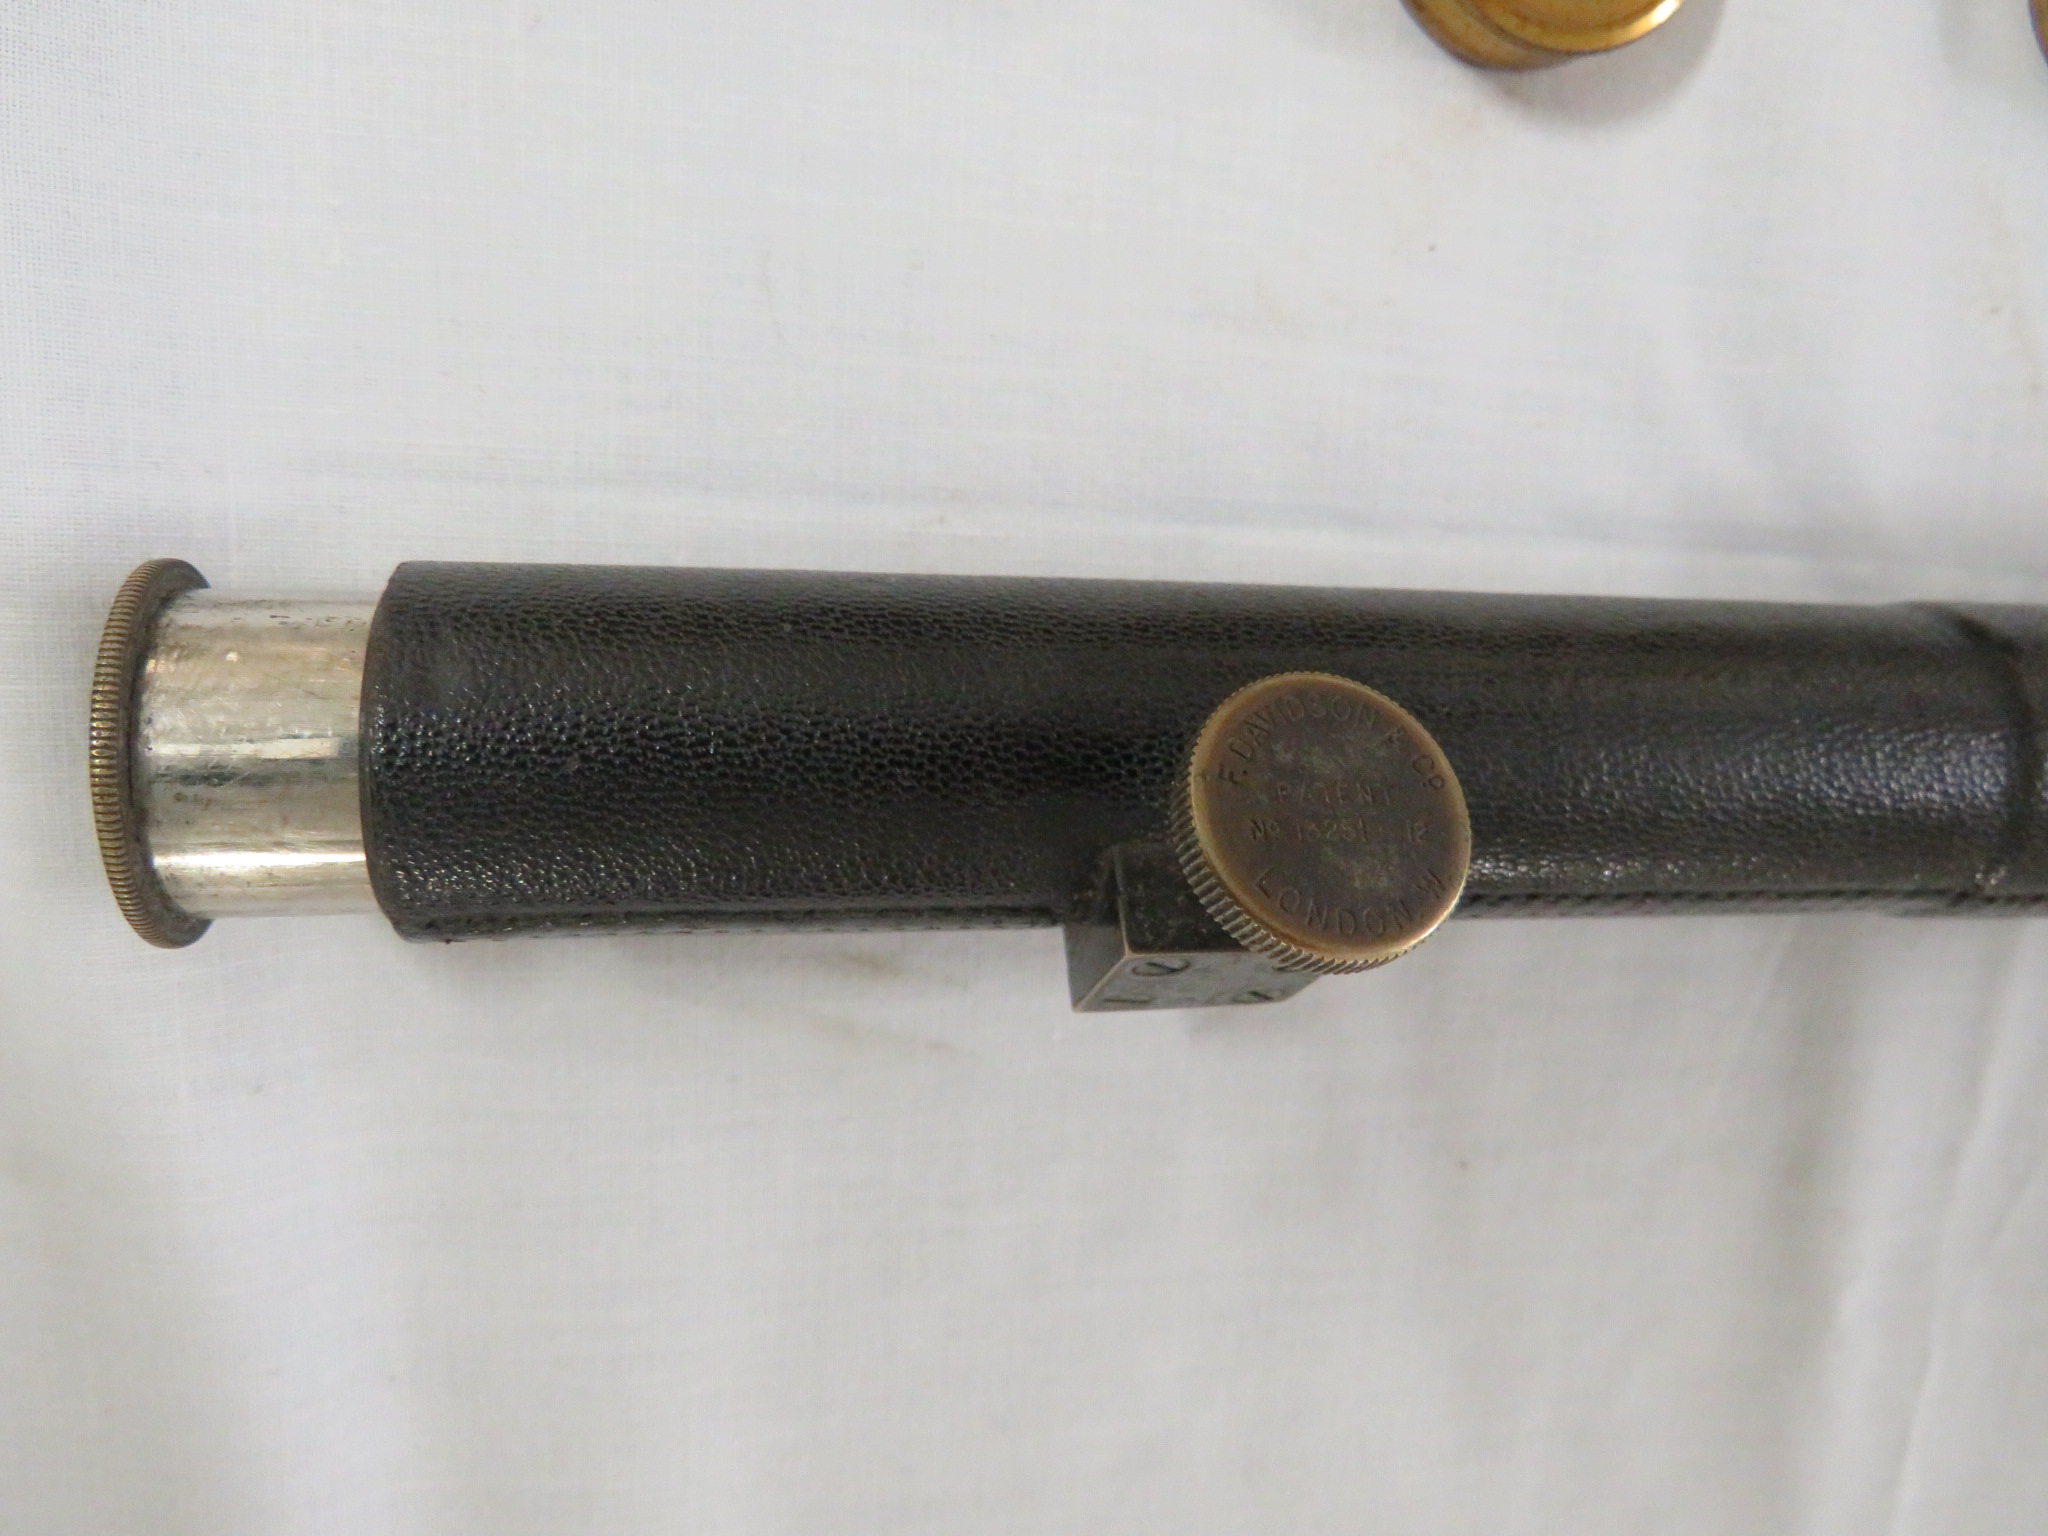 Davon patent micro-telescope, brass tube covered in black leather, with three internal lenses - - Image 3 of 4